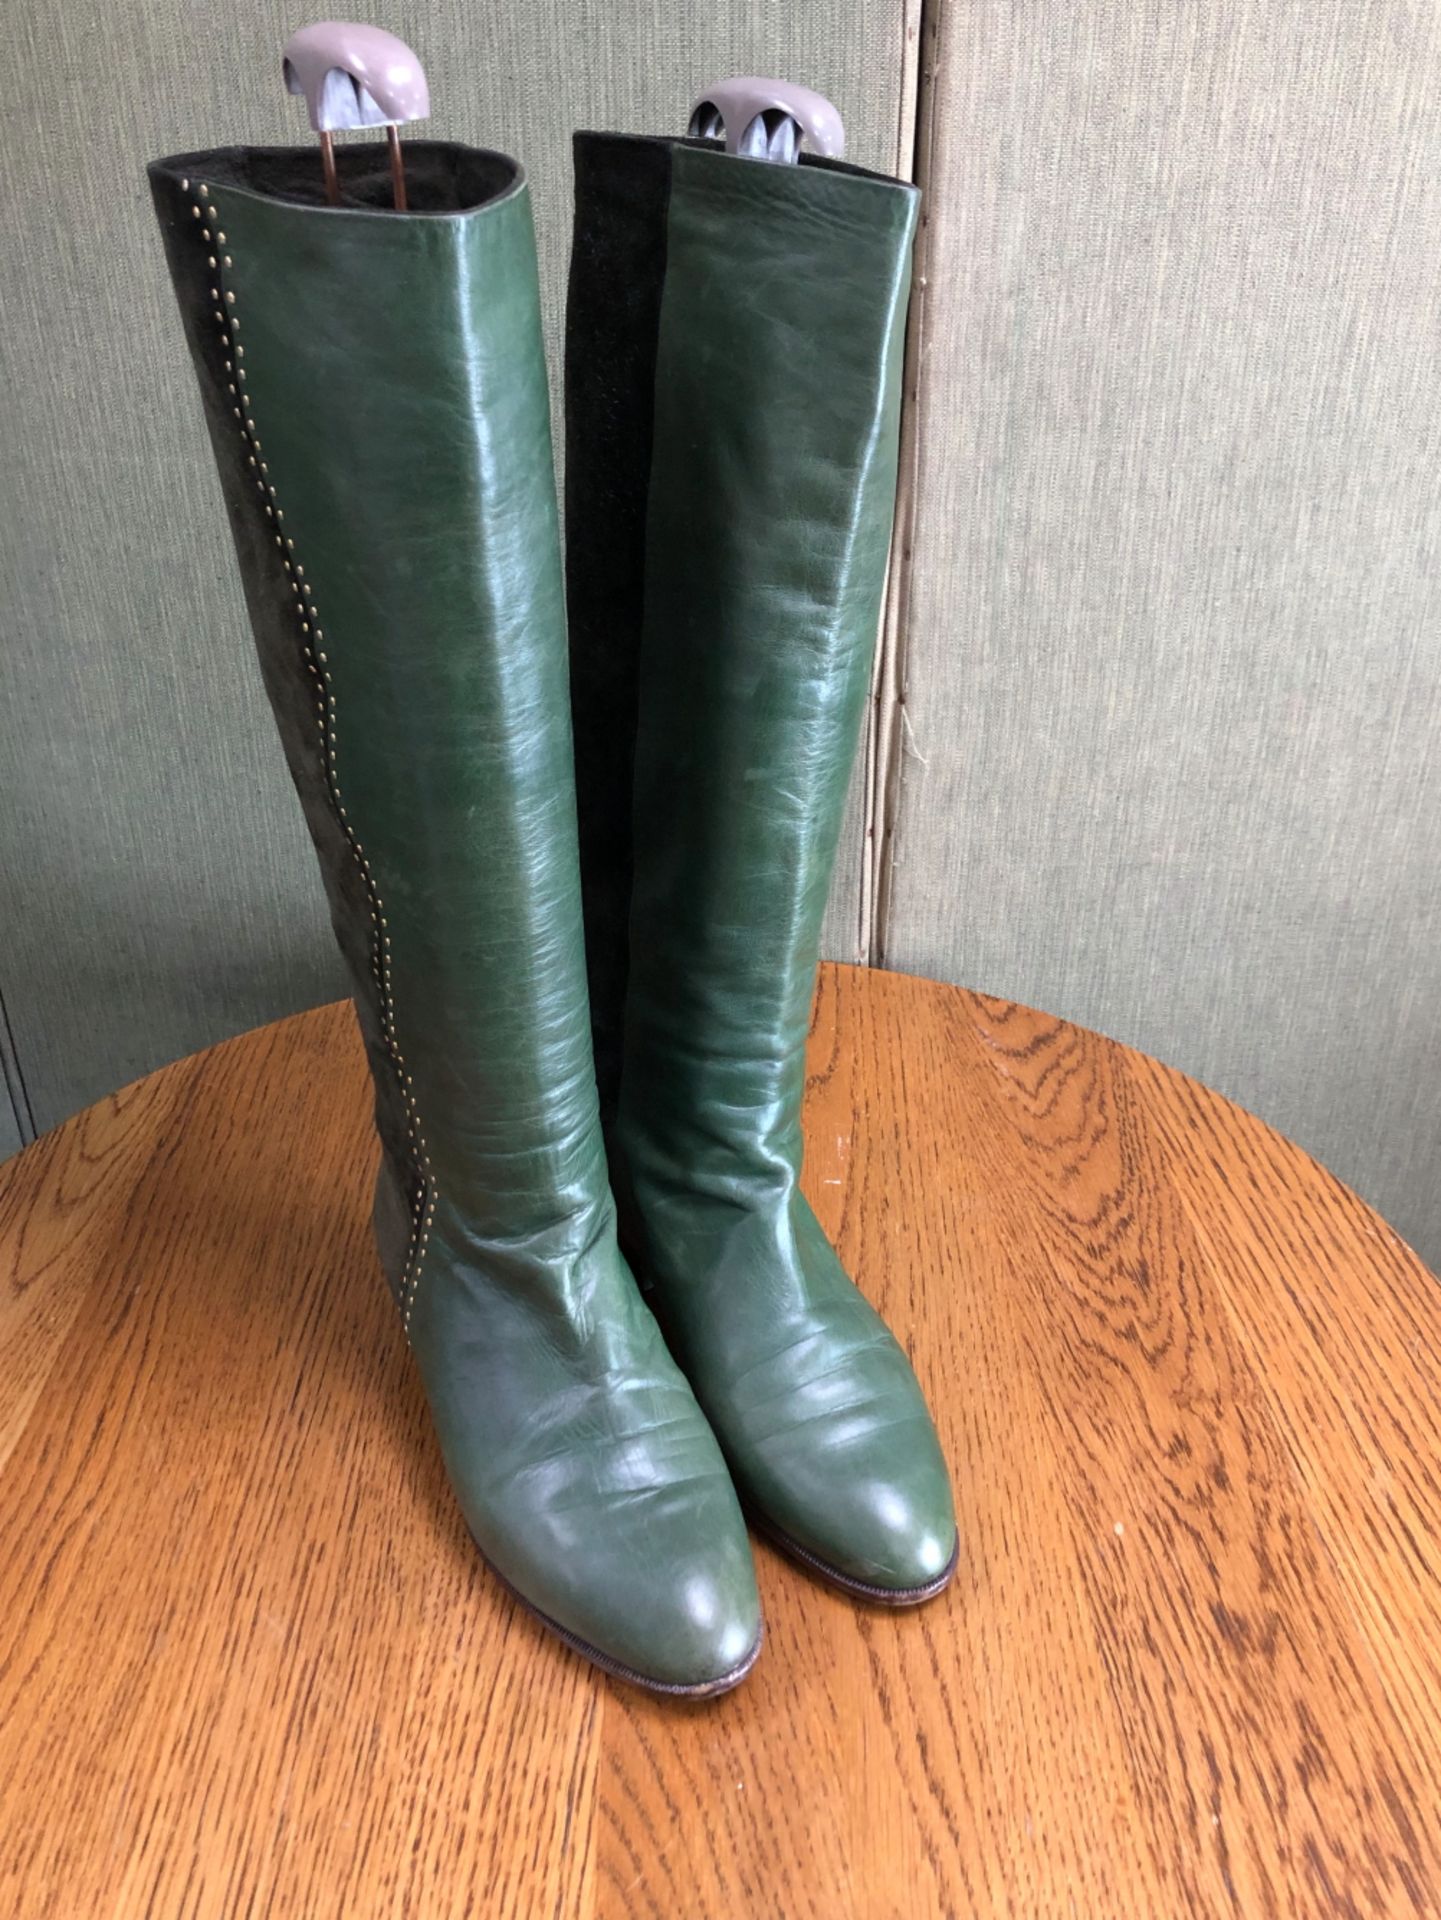 BOOTS: A PAIR OF BRUNO MAGLI GREEN LEATHER AND SUEDE BOOTS SIZE EU 39 - Image 9 of 9